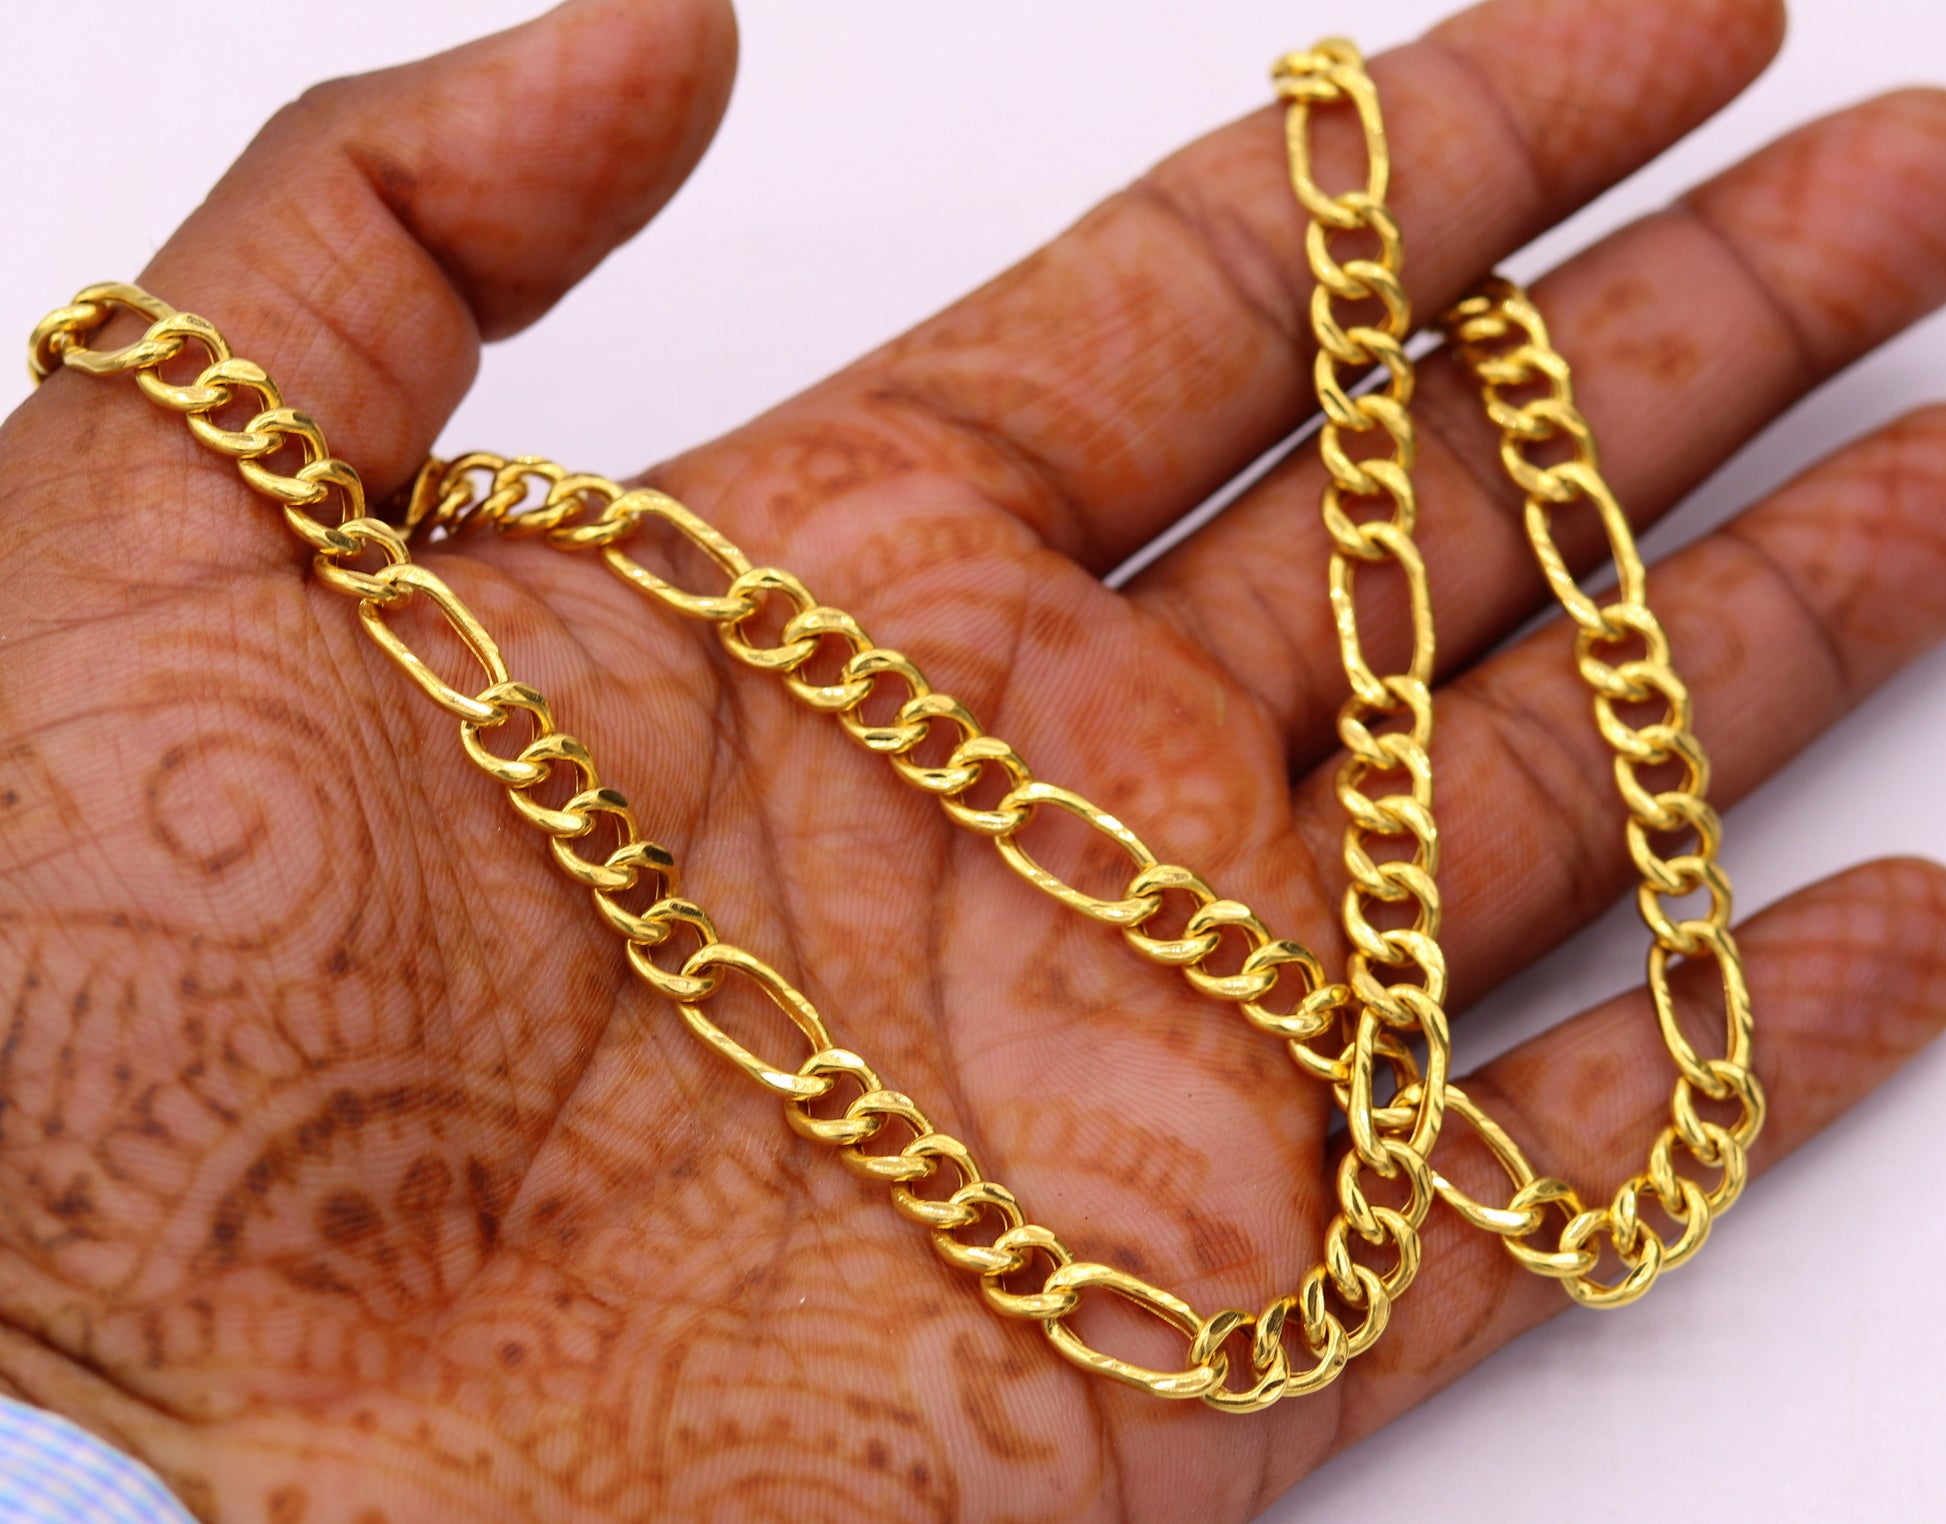 22kt yellow gold handmade fabulous figaro link chain 18 inches long 6 mm excellent attractive stylish unisex gifting chain necklace - TRIBAL ORNAMENTS